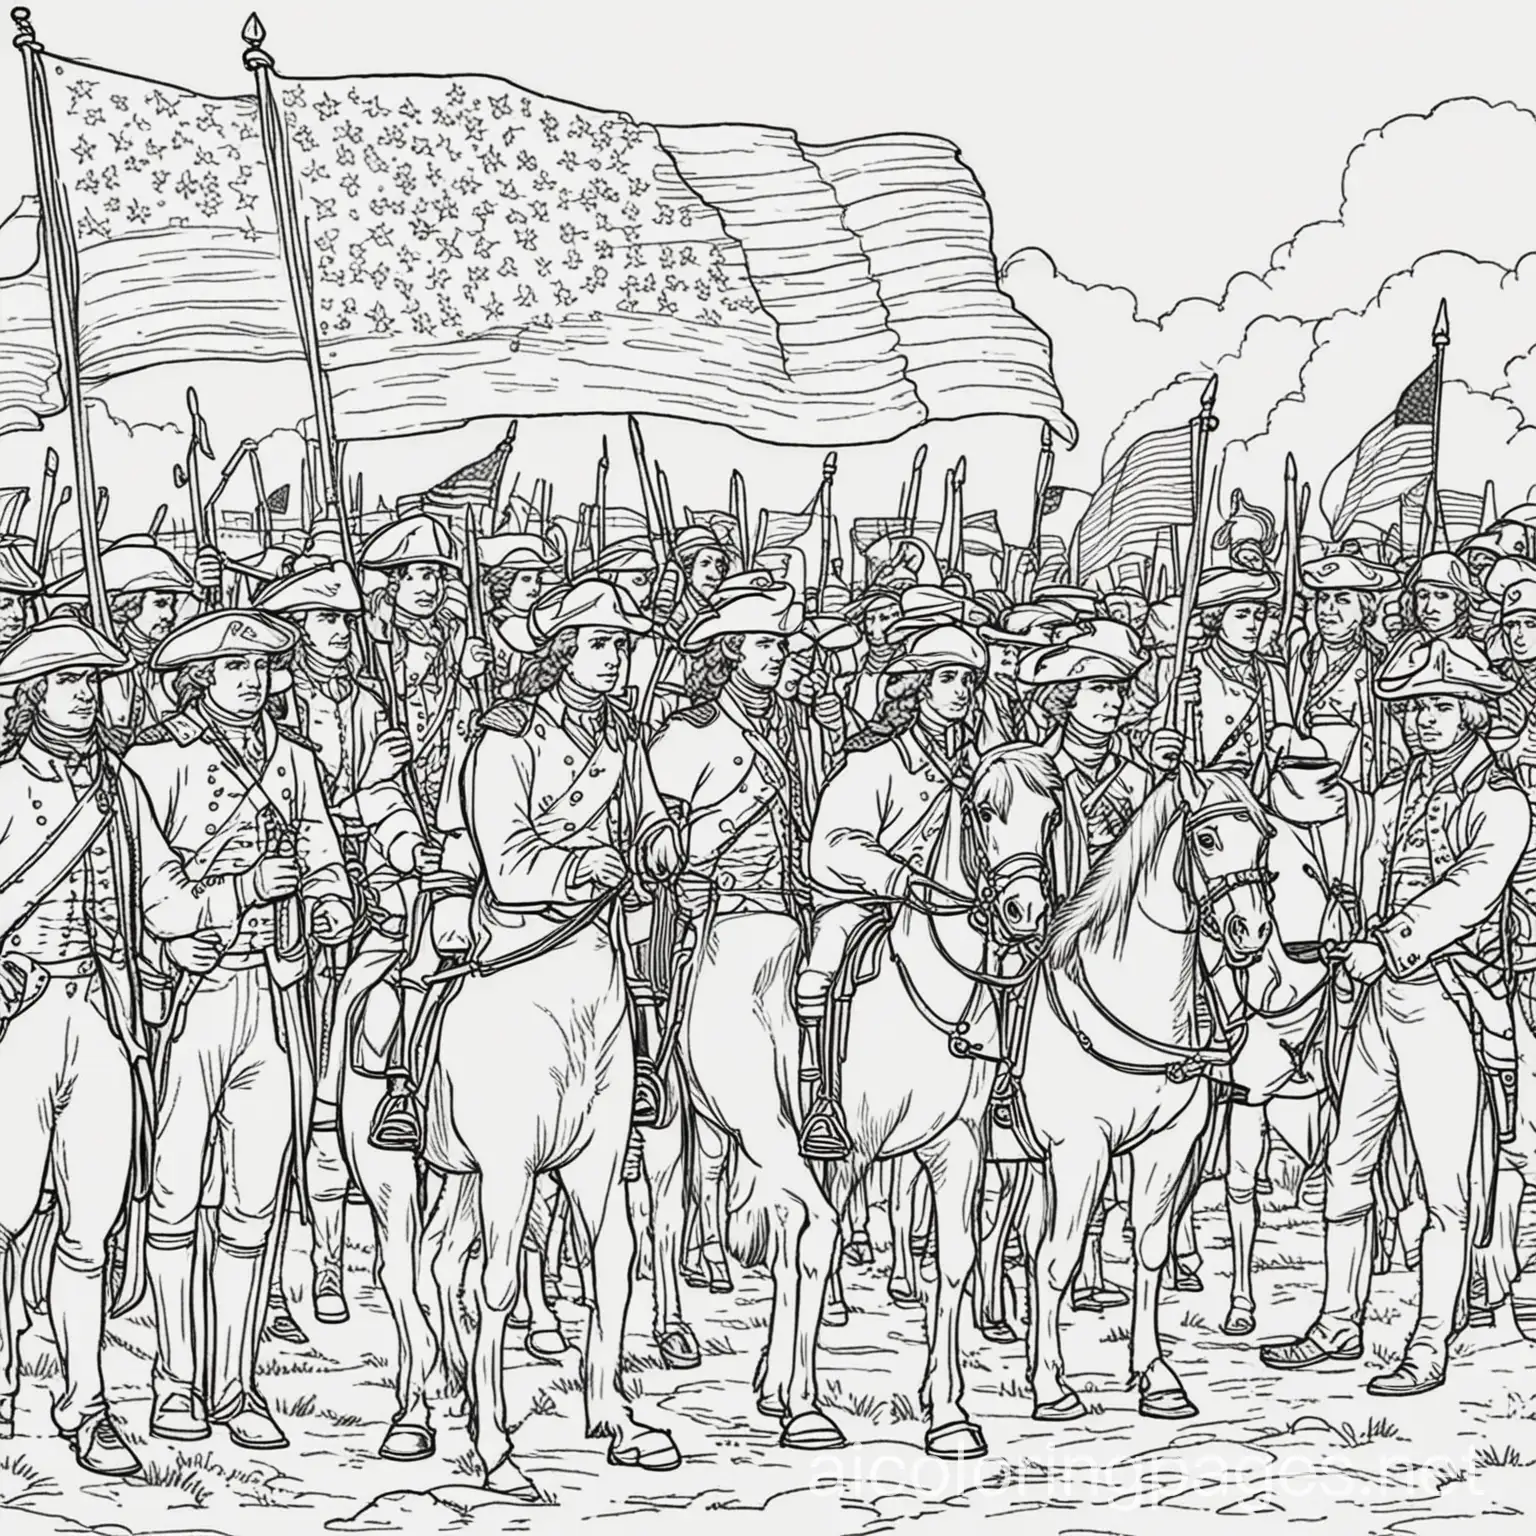 american revolution, Coloring Page, black and white, line art, white background, Simplicity, Ample White Space. The background of the coloring page is plain white to make it easy for young children to color within the lines. The outlines of all the subjects are easy to distinguish, making it simple for kids to color without too much difficulty